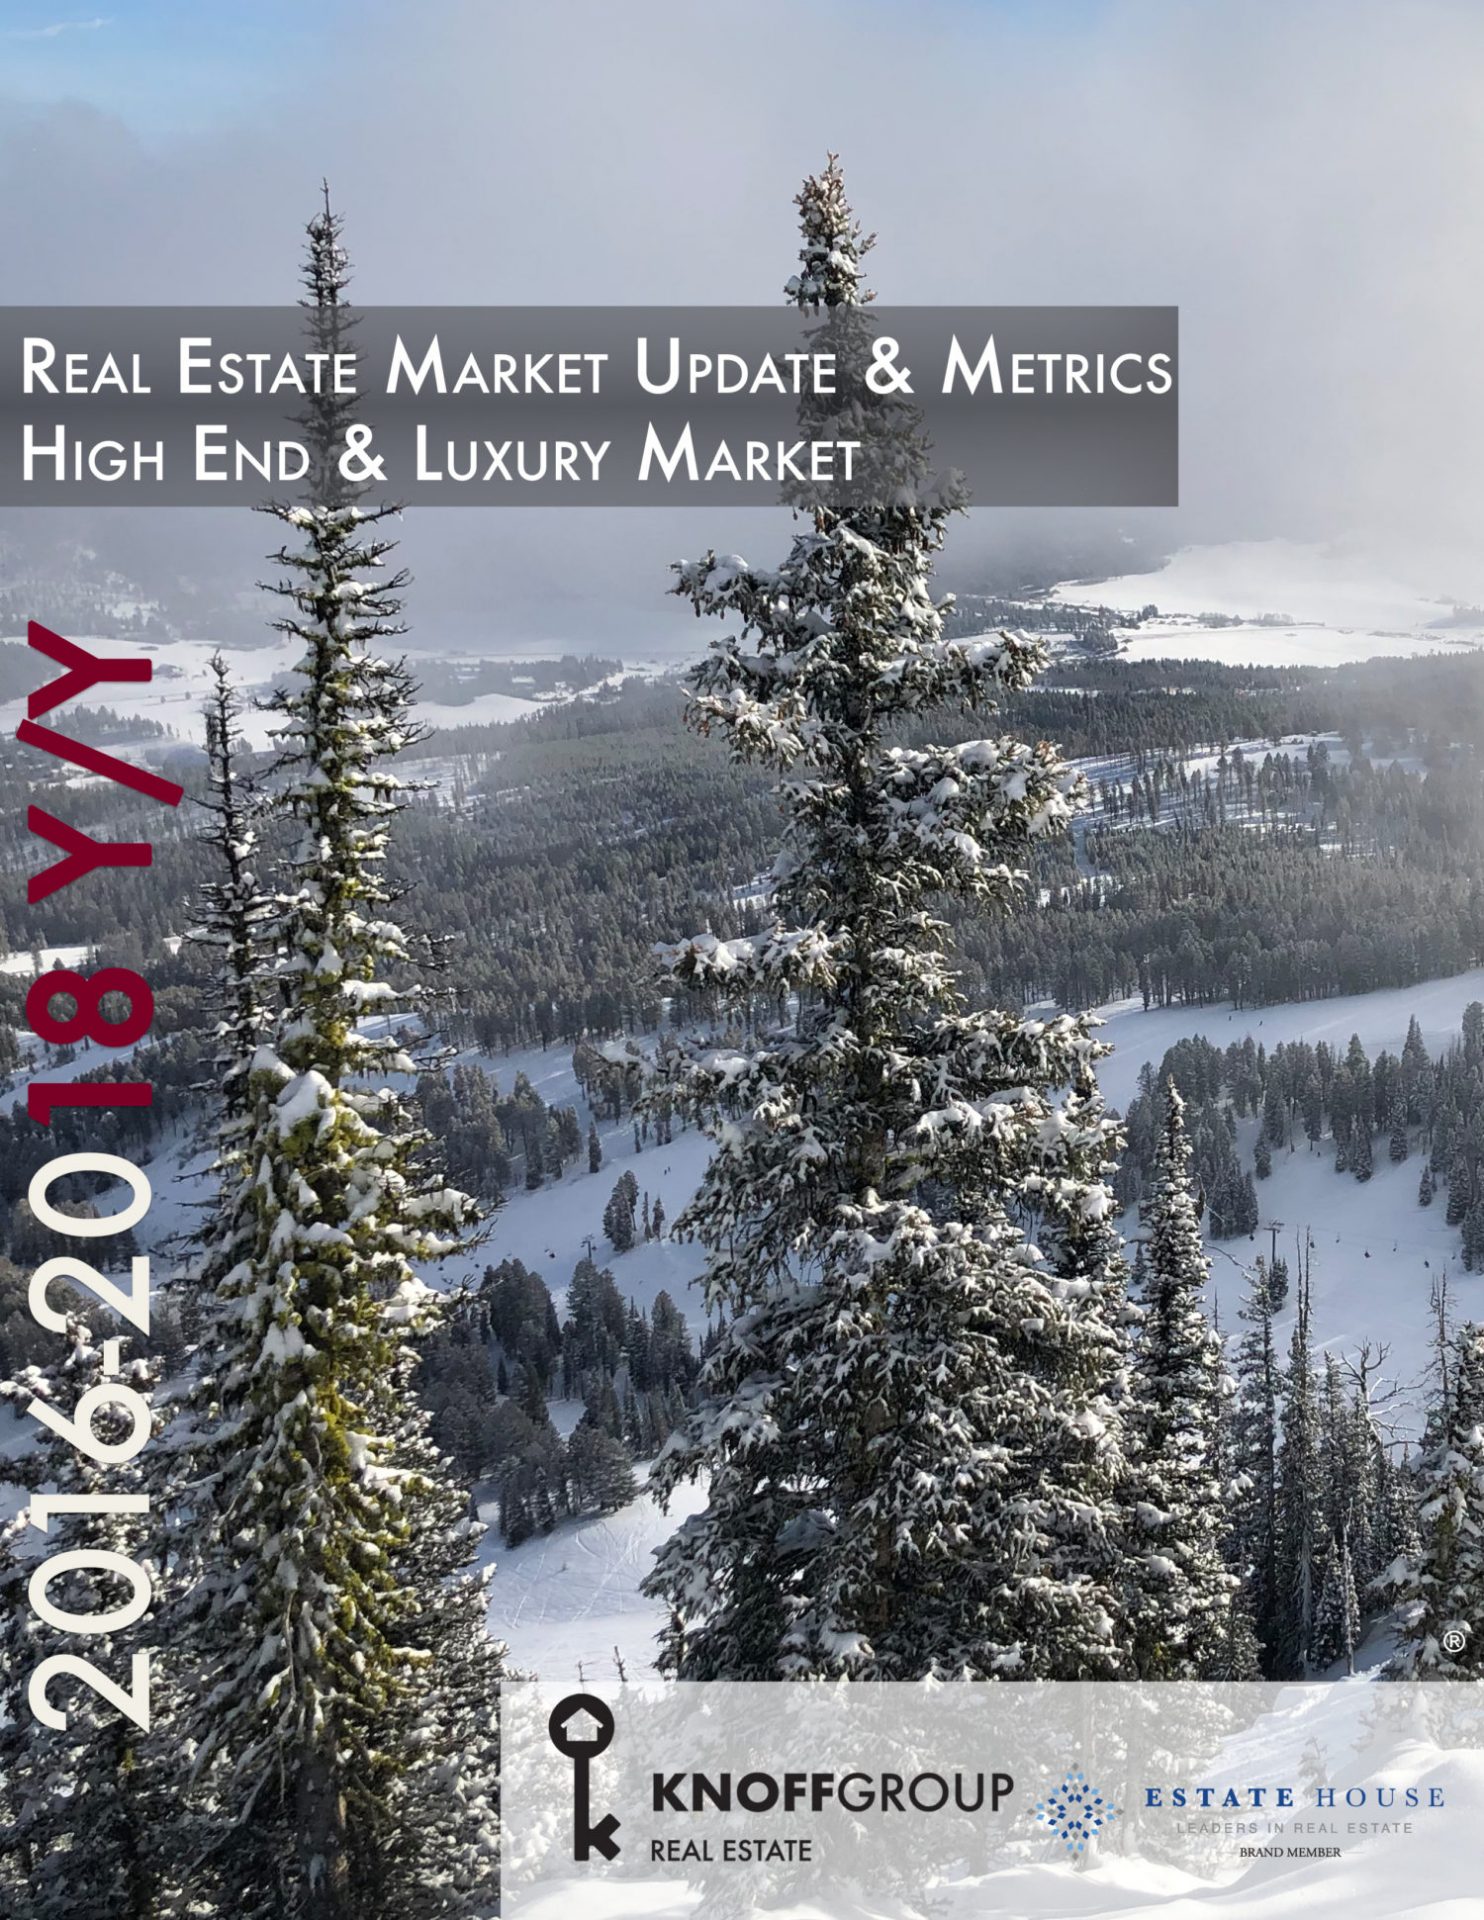 Luxury and High End Real Estate Market Update and Metrics 2016-2018